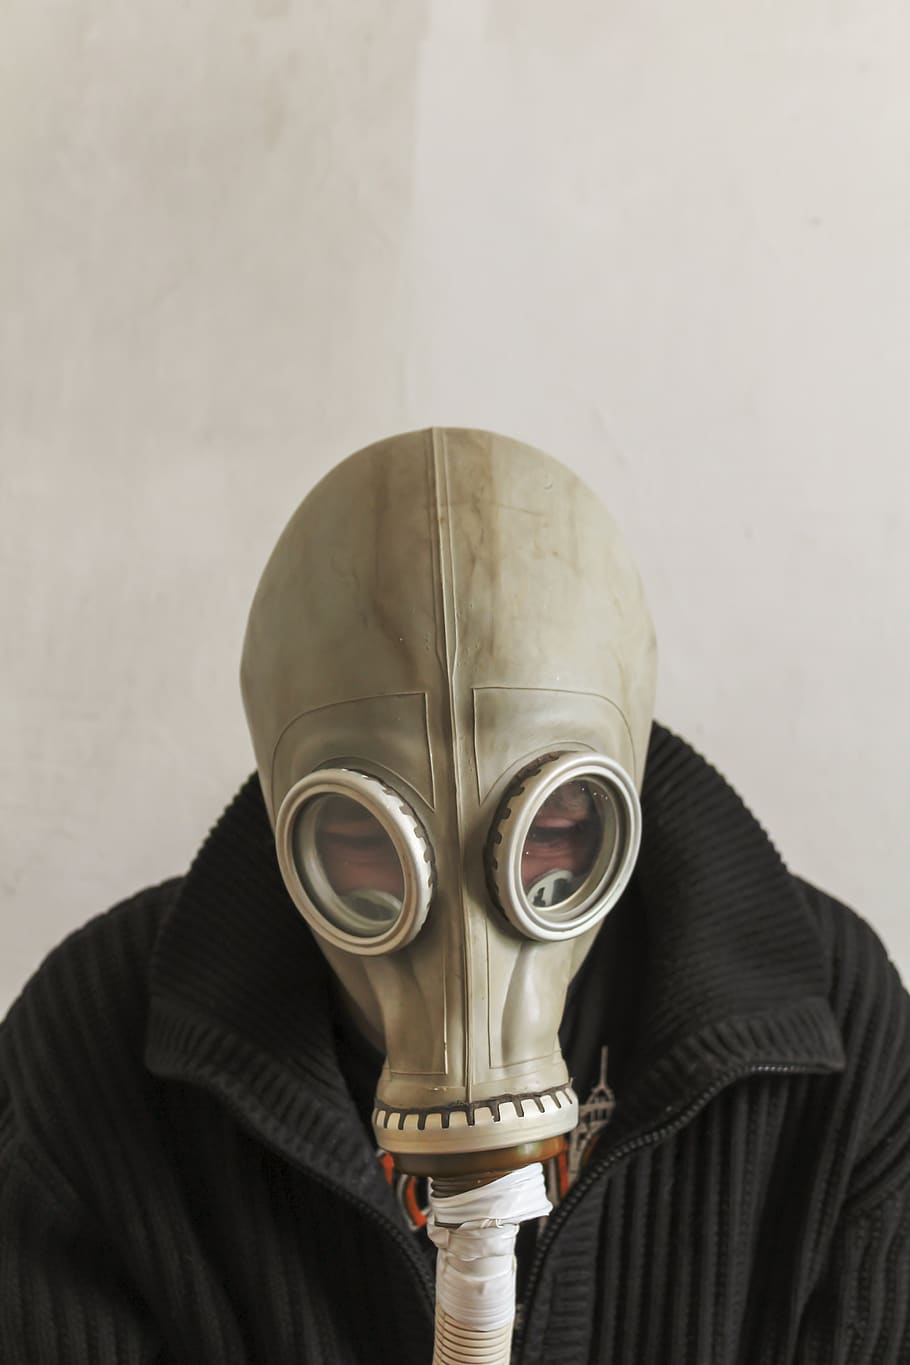 man in gas mask, gas mask, man, chernobyl, danger, mask, unrecognizable person, indoors, one person, obscured face